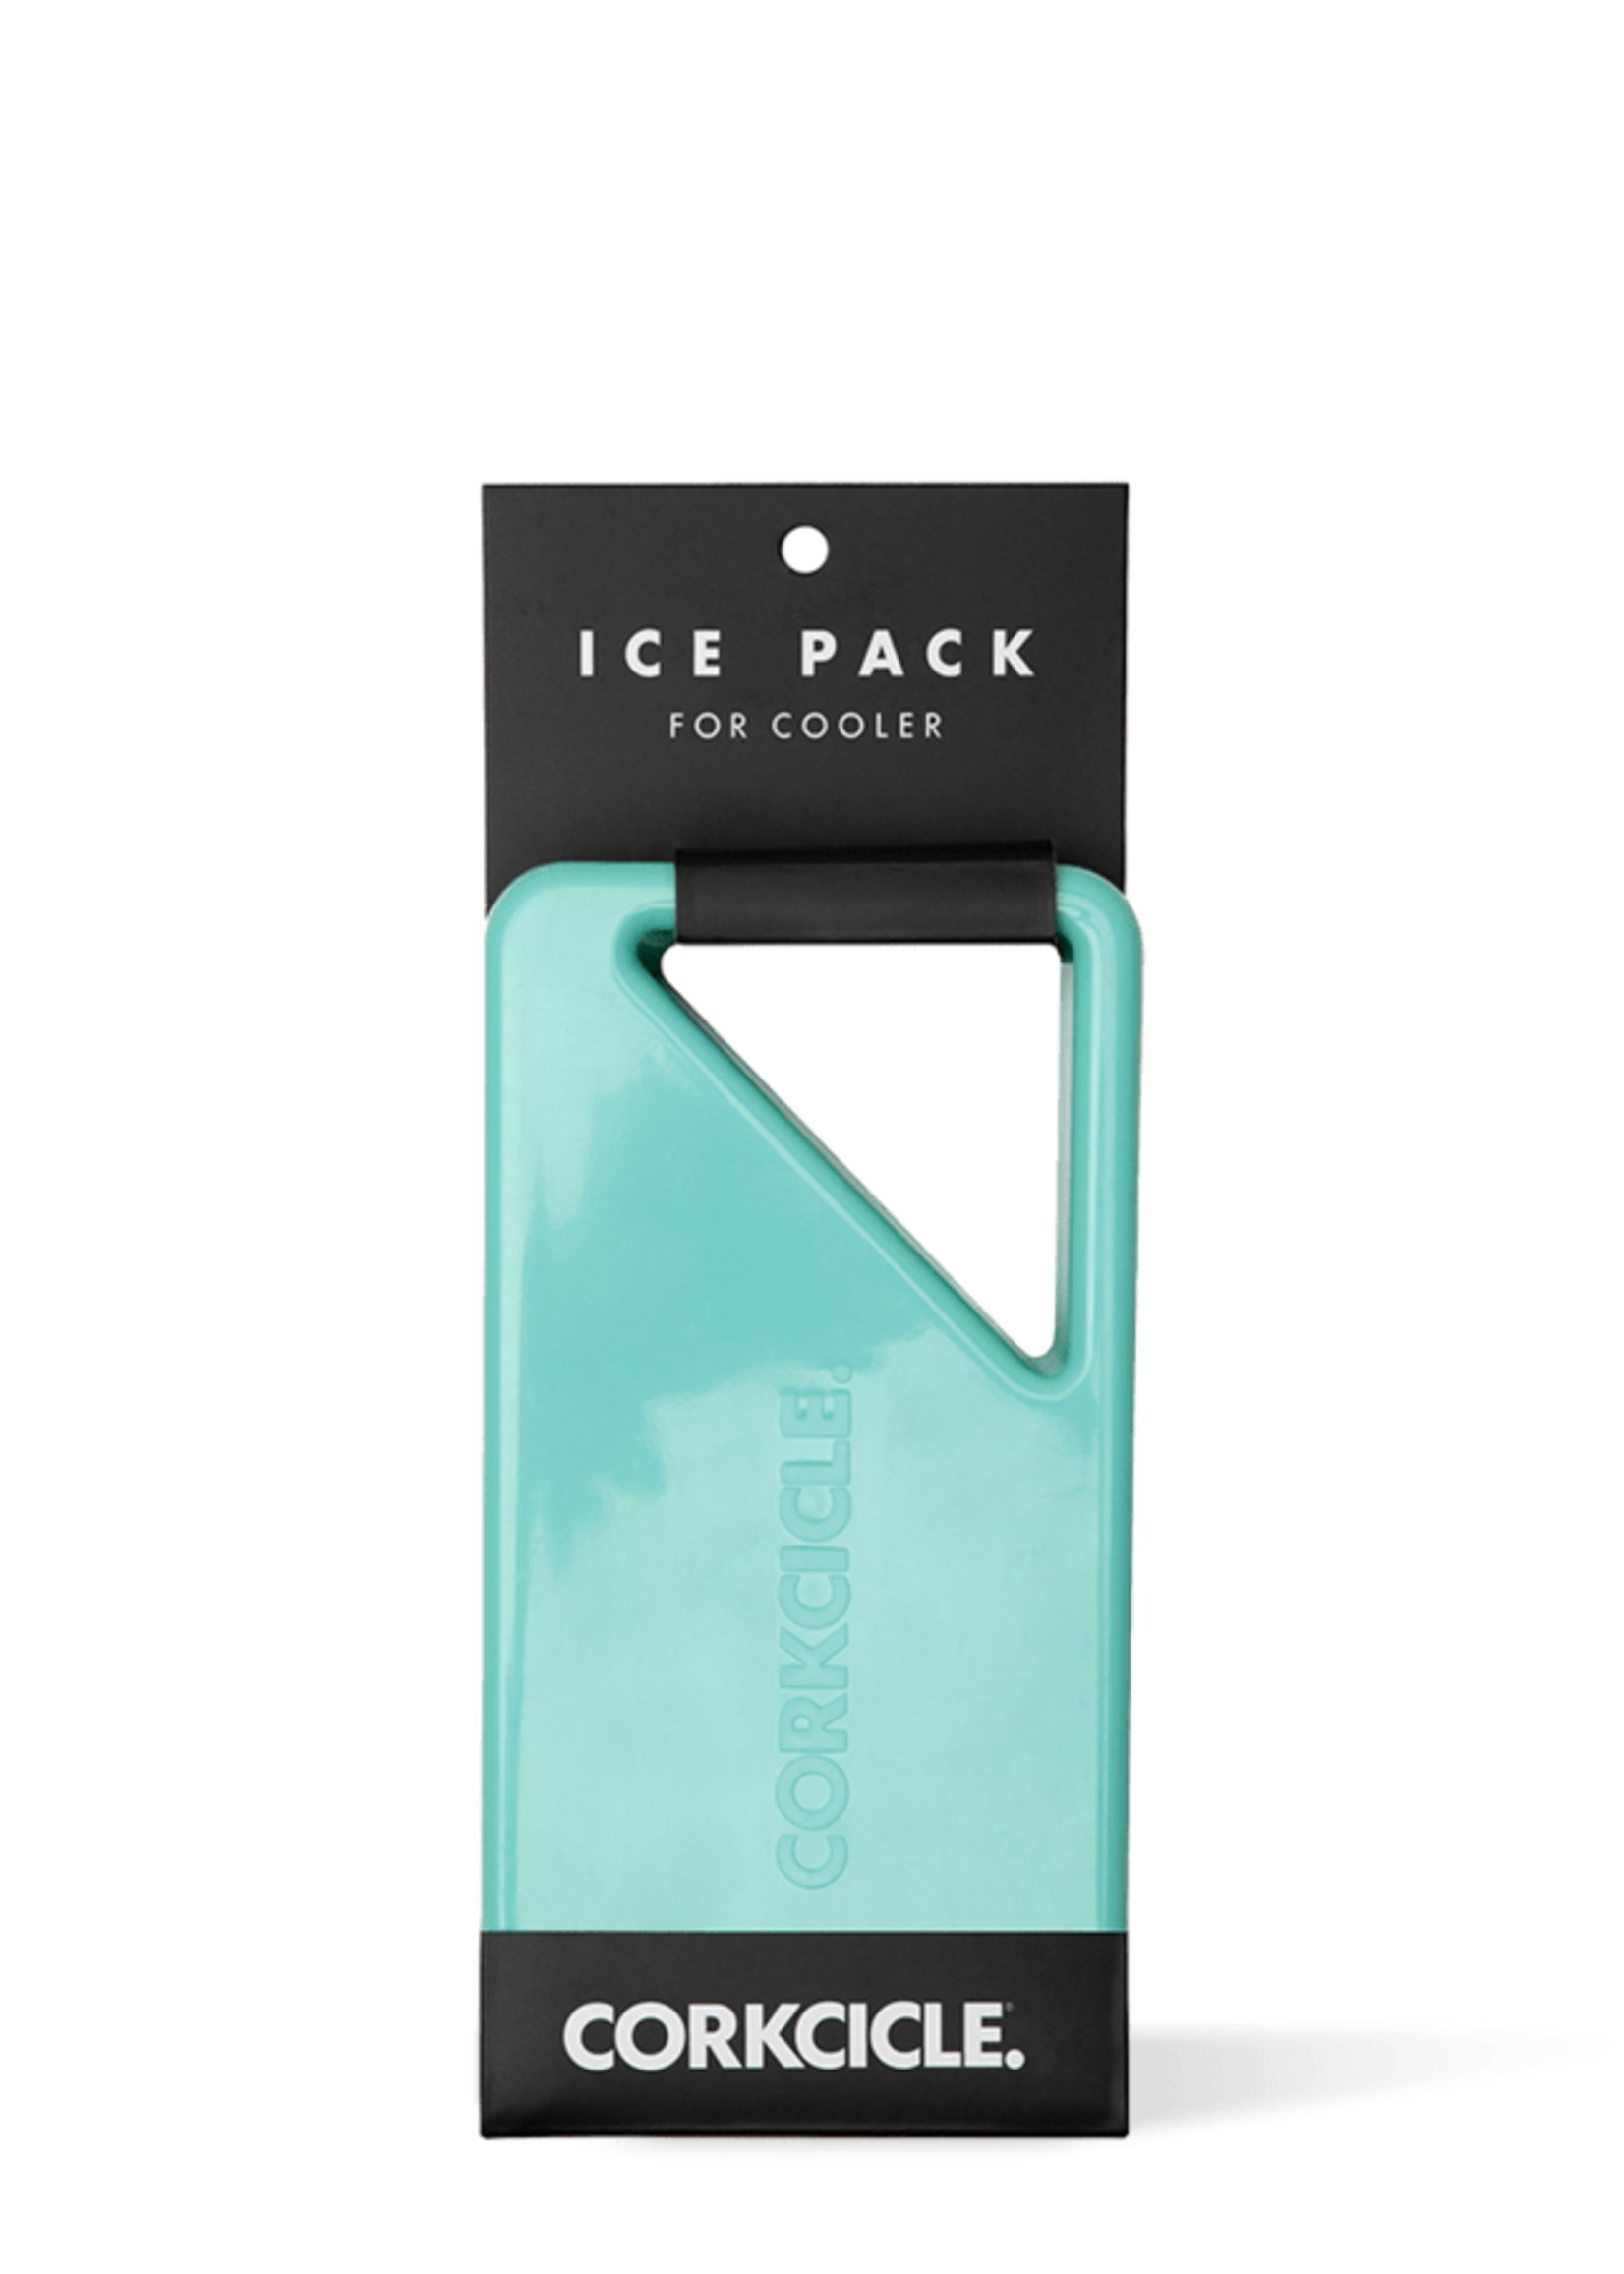 Corkcicle Ice Pack Cooler